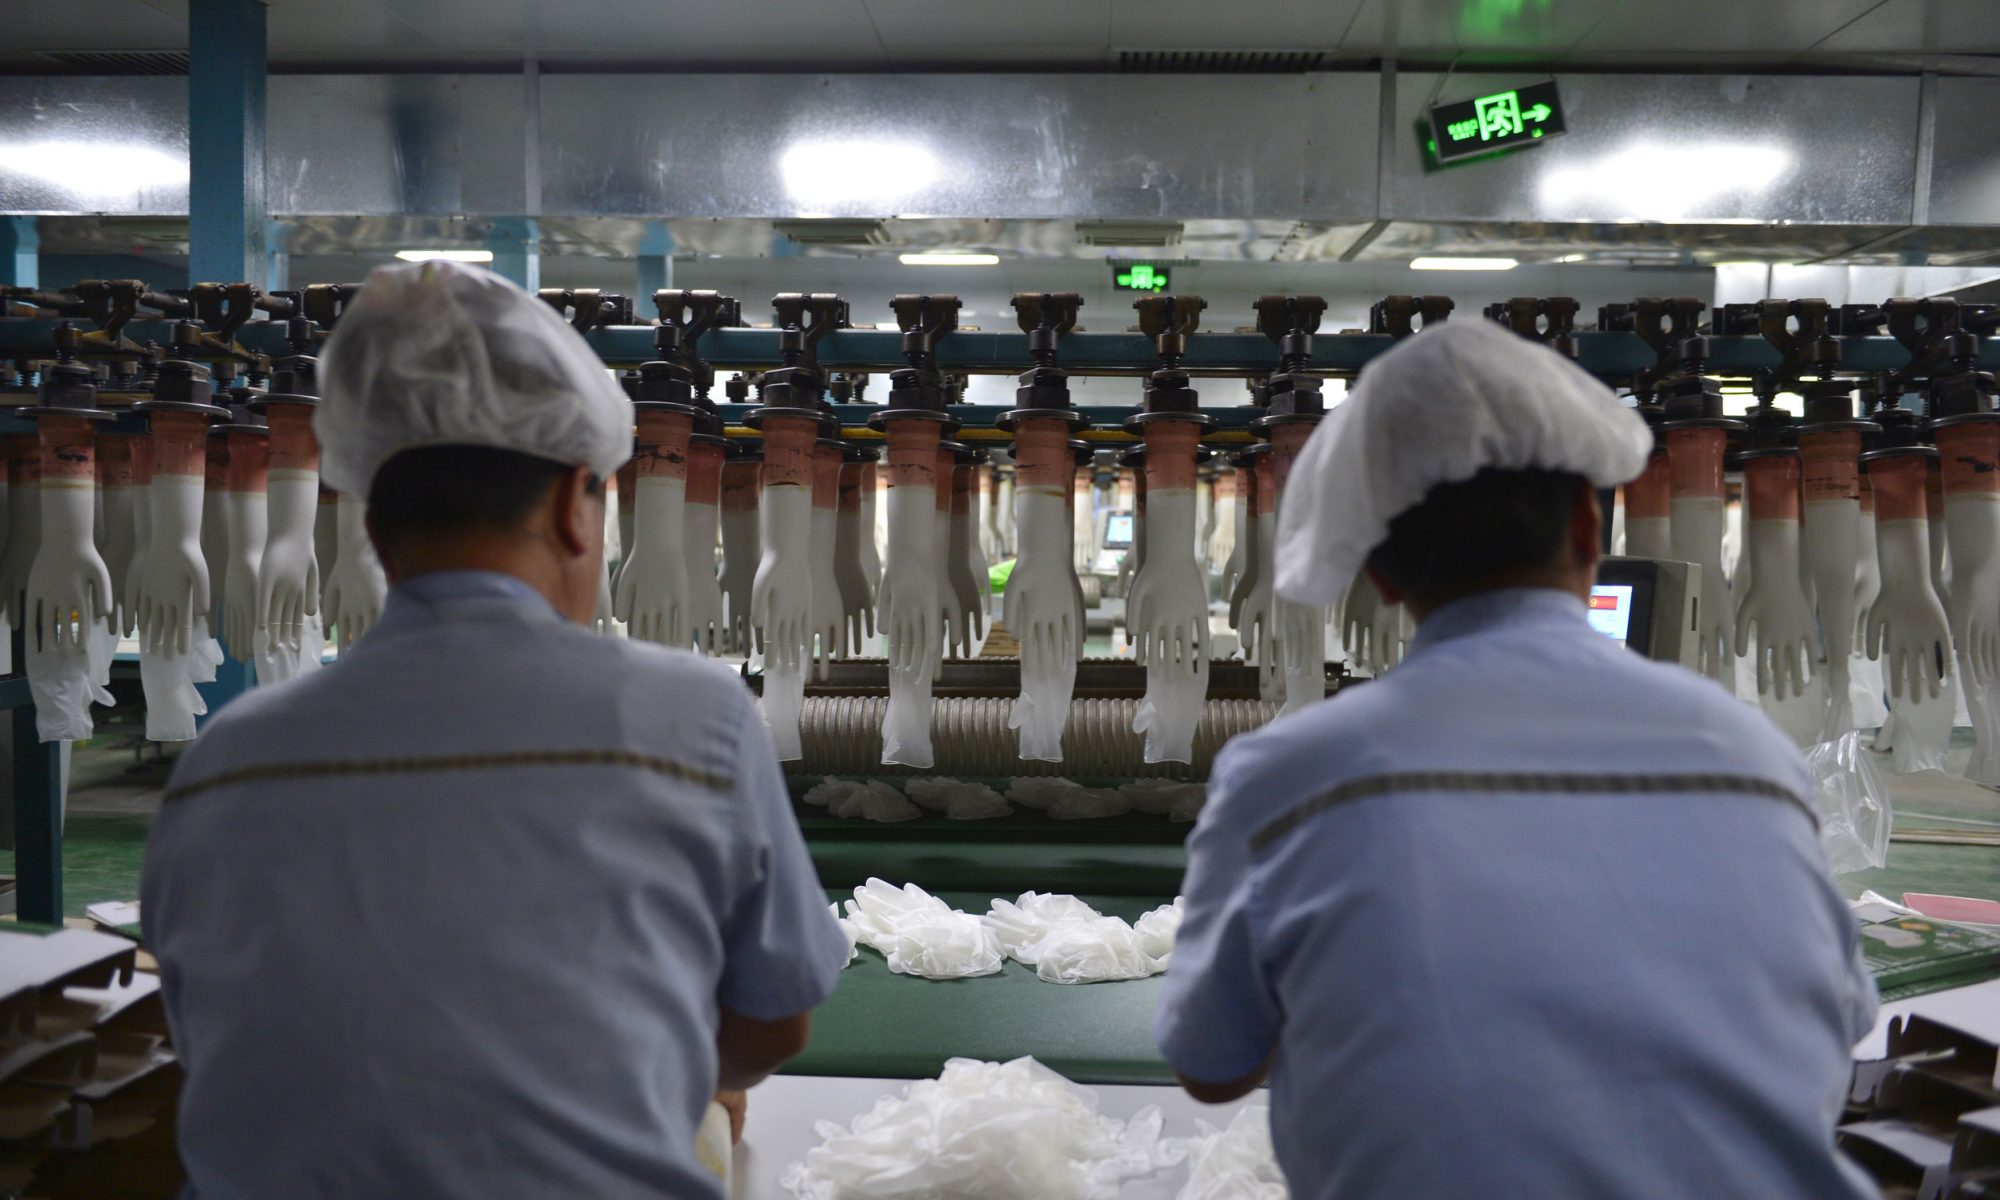 Workers on the disposable glove production line. Photo by Song Qiuju/123rf